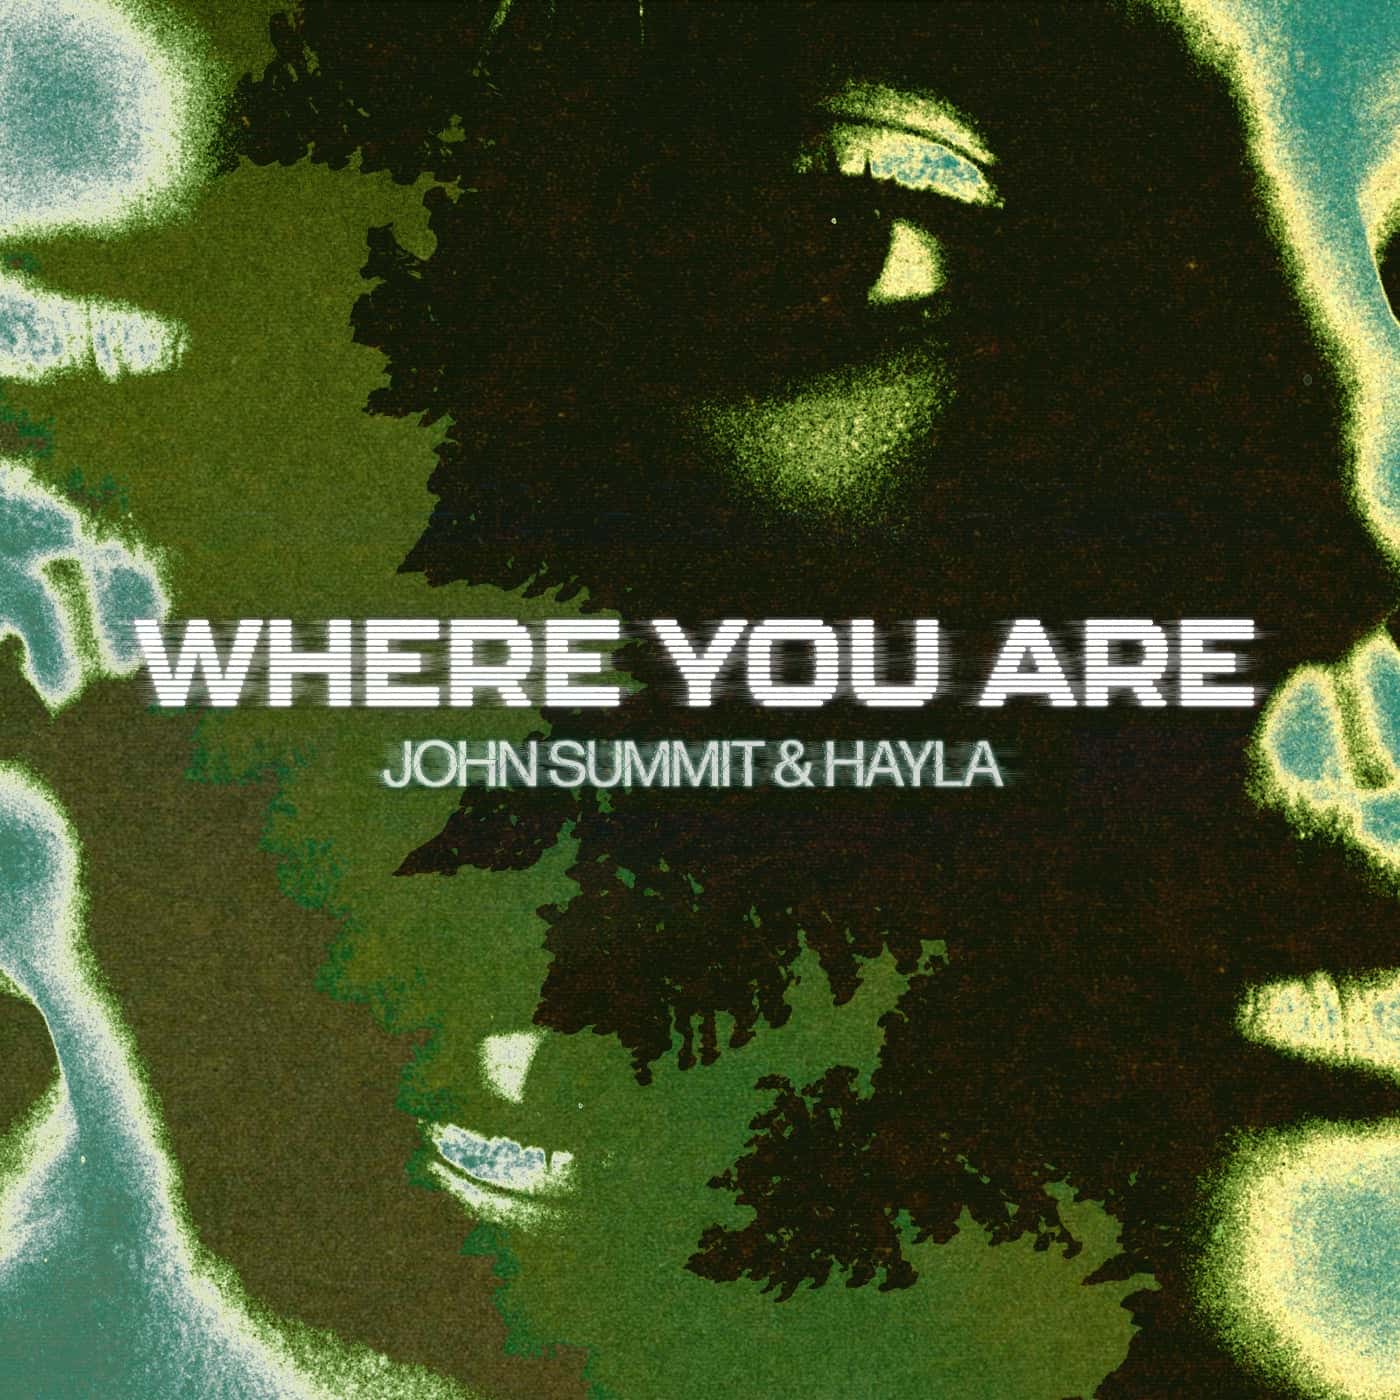 Download John Summit, Hayla - Where You Are - Extended Mix on Electrobuzz